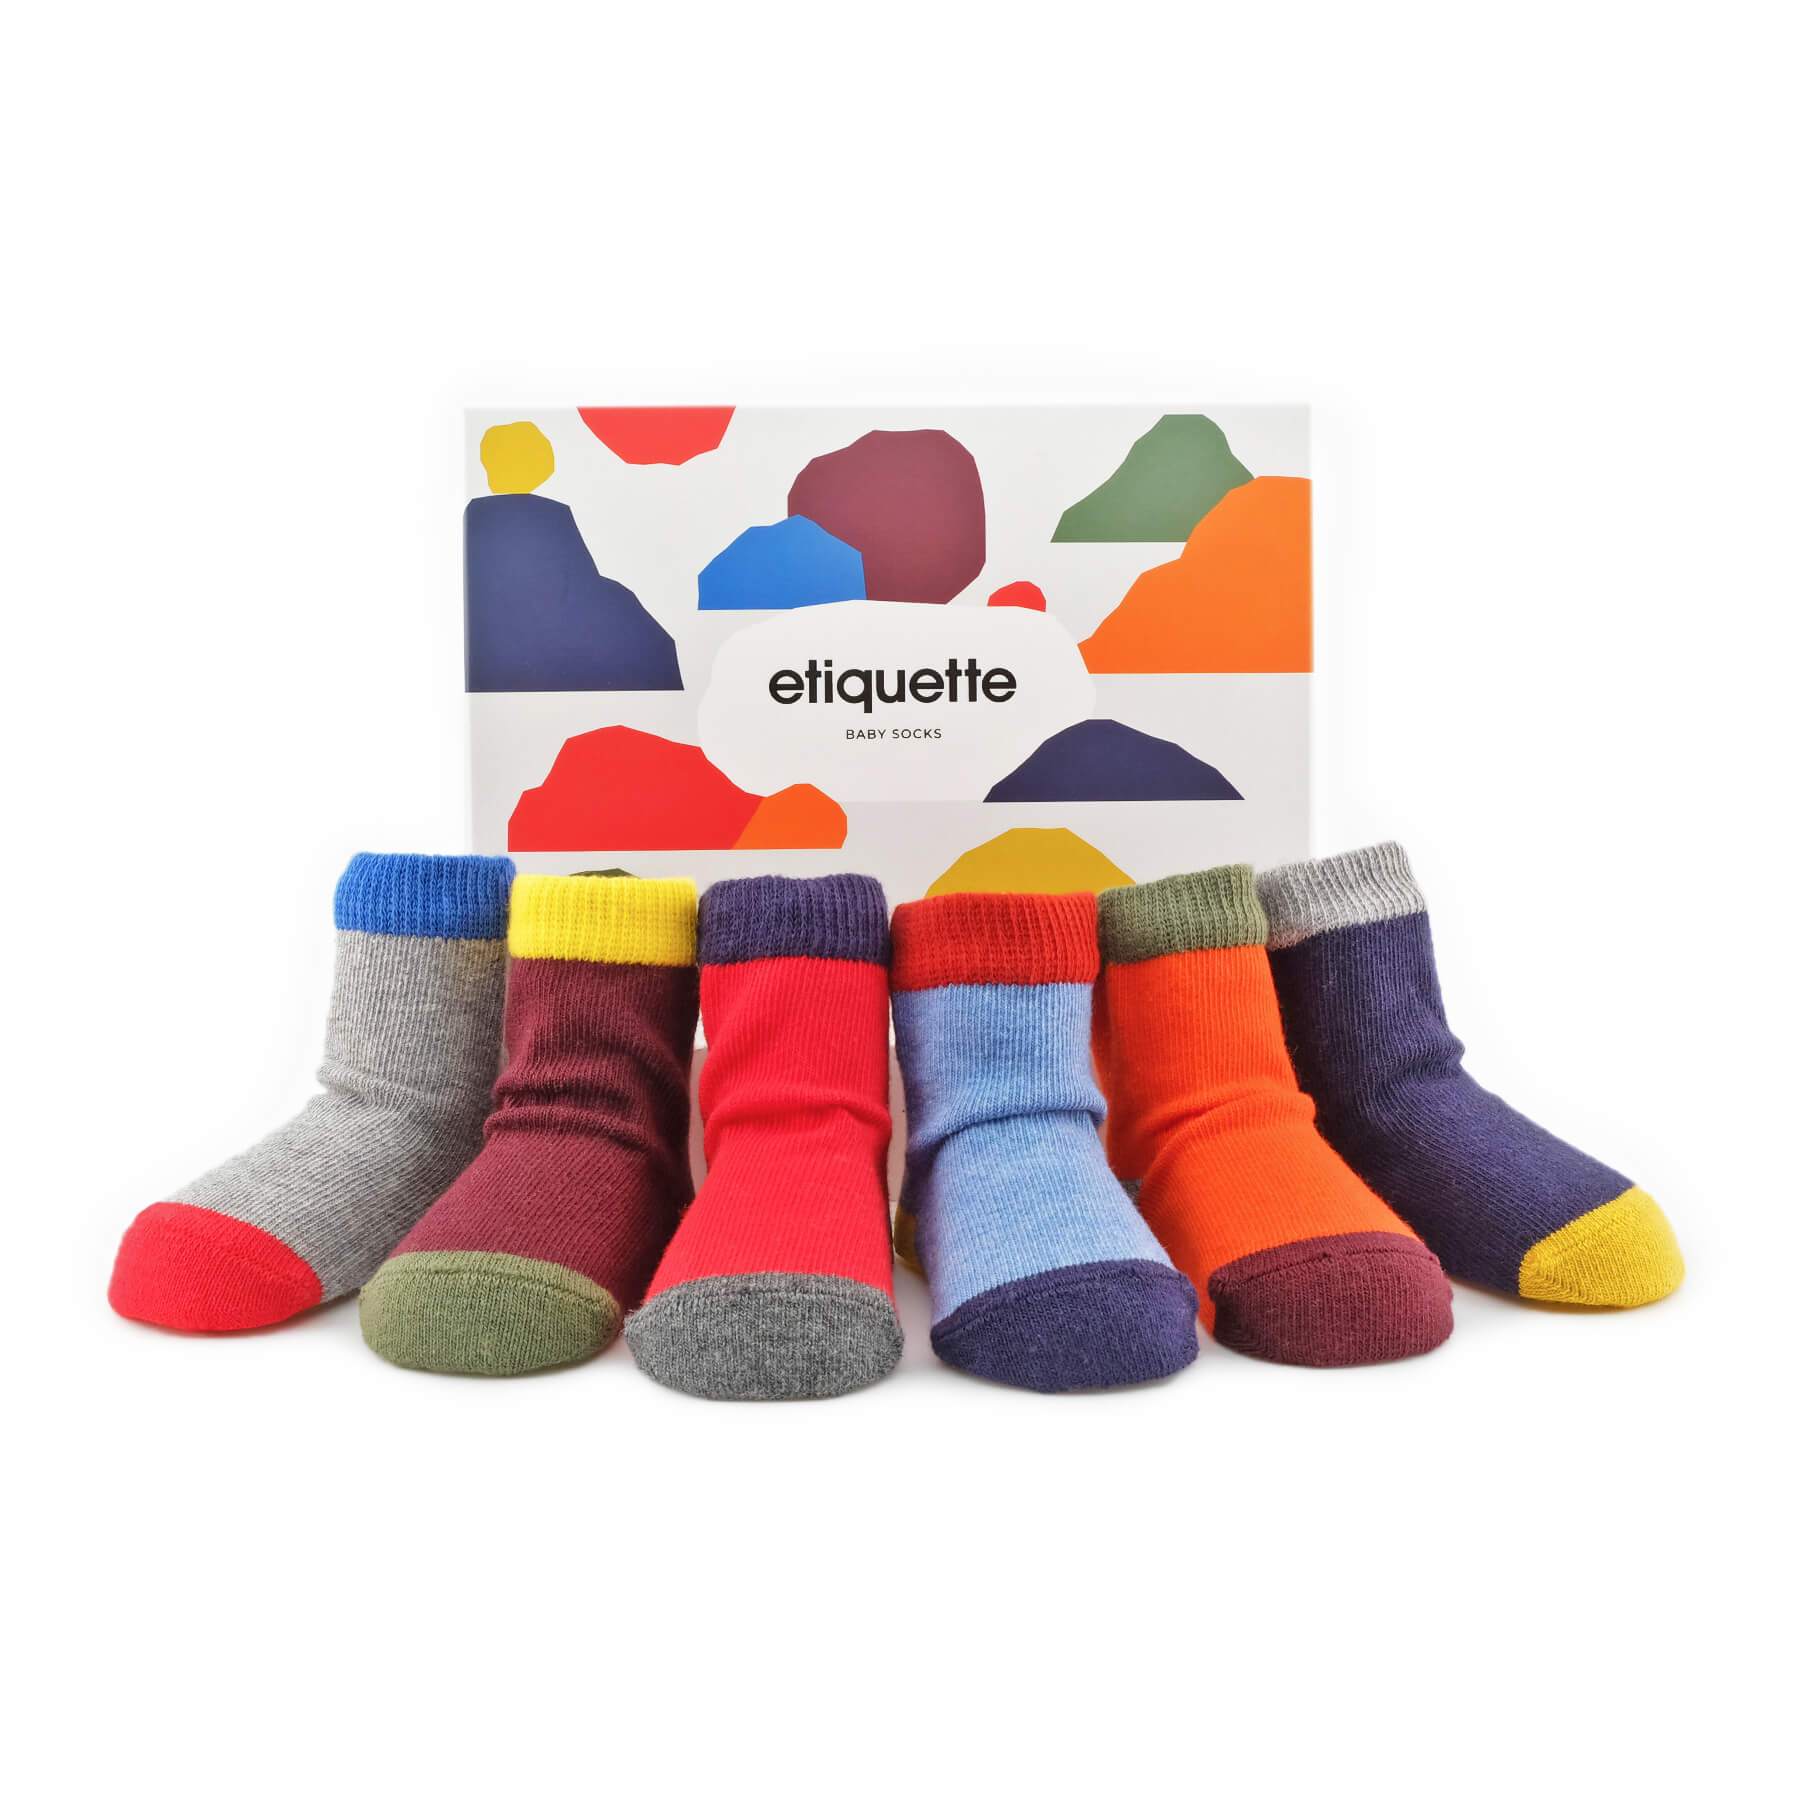 Baby Socks - Solid As A Rock Baby Socks Gift Box - Color Block Baby Socks - main view⎪Lil'Etiquette Clothiers